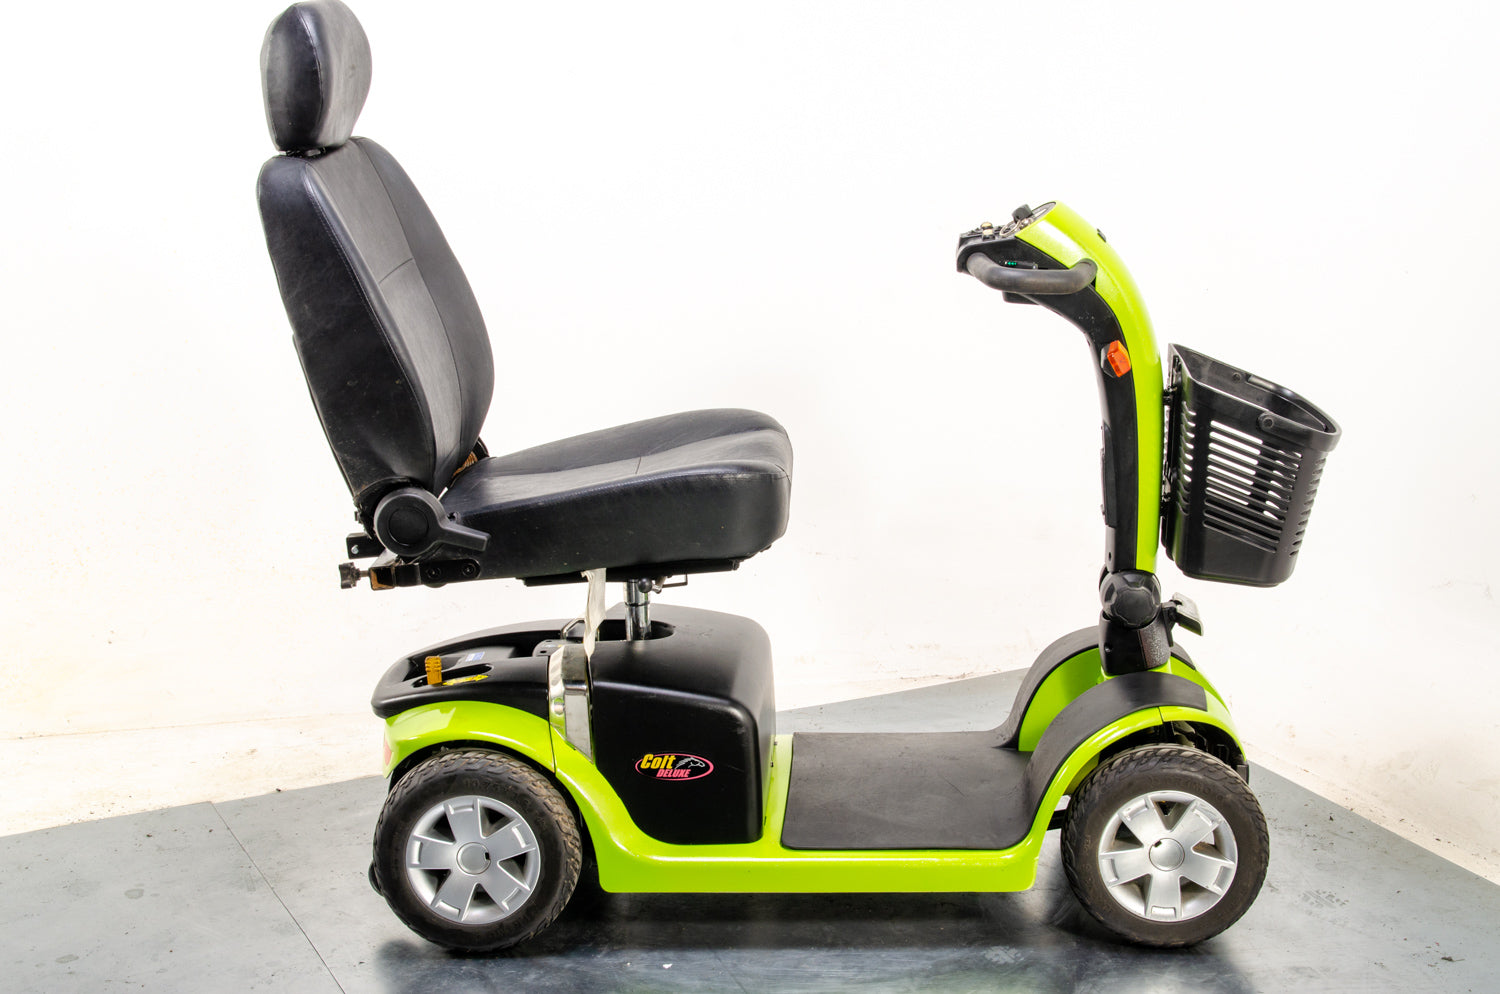 Pride Colt Deluxe Used Electric Mobility Scooter 6mph Transportable Road Pavement Seat Post Suspension Solid Tyres Lime Green 13443